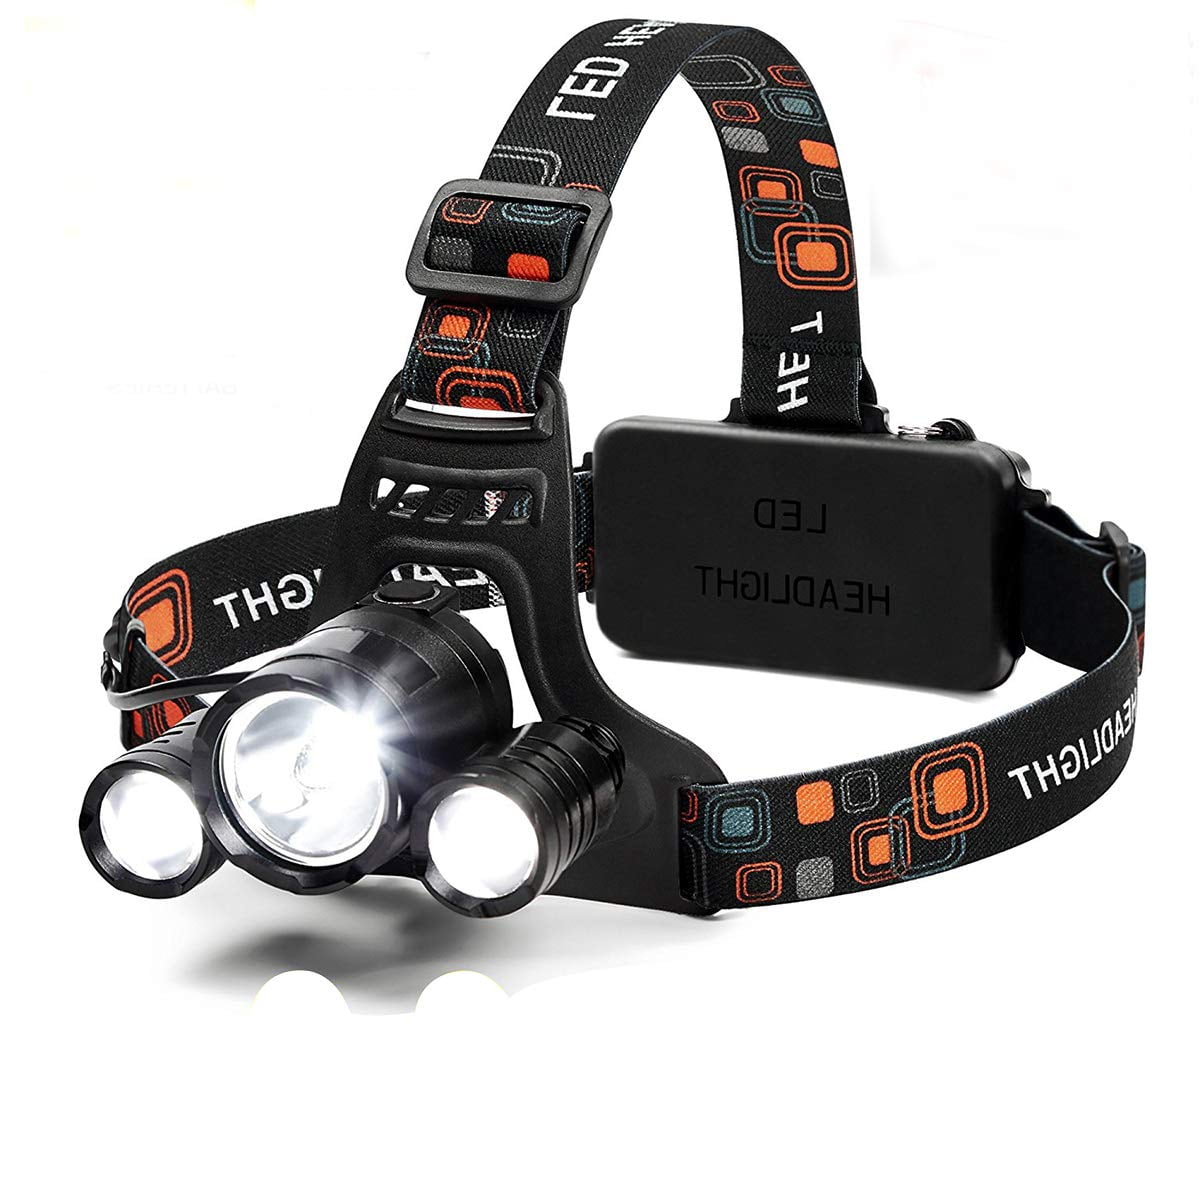 LED Headlamp 6000 Lumen Flashlight, 4 Modes Light, Rechargeable 18650 Headlight, Waterproof Hard Hat Running Bright Head Lights, Hunting or Camping Headlamps+Charger+Car Charger - Walmart.com